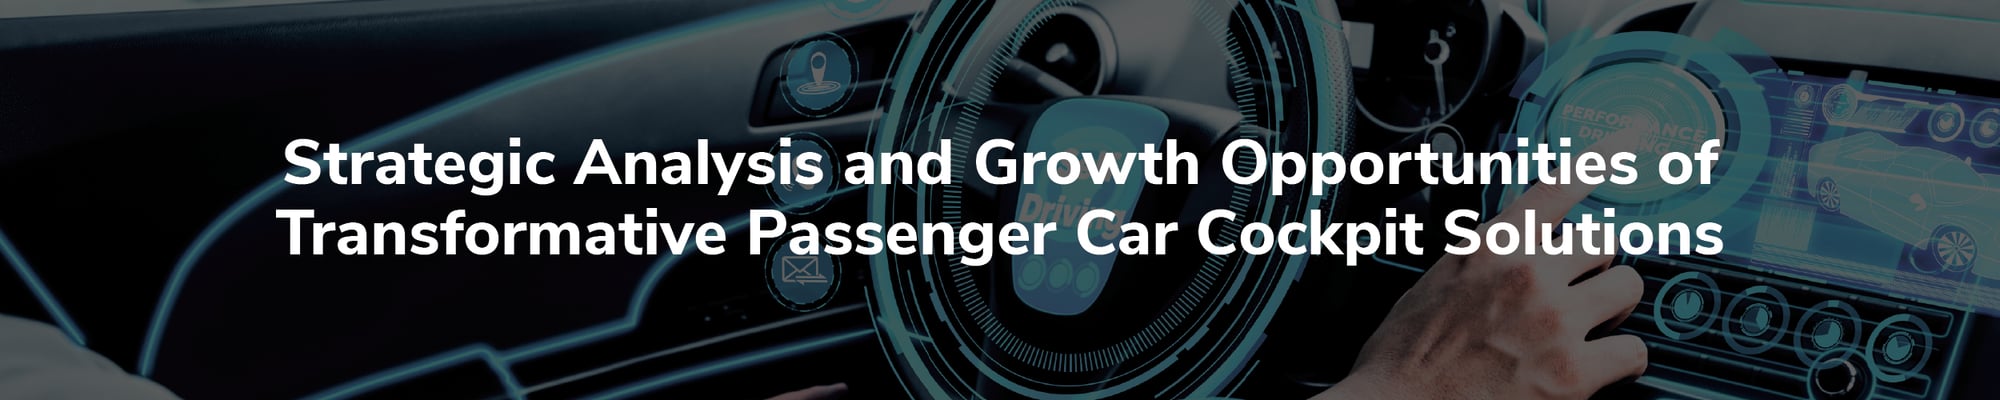 Strategic Analysis and Growth Opportunities of Transformative Passenger Car Cockpit Solutions